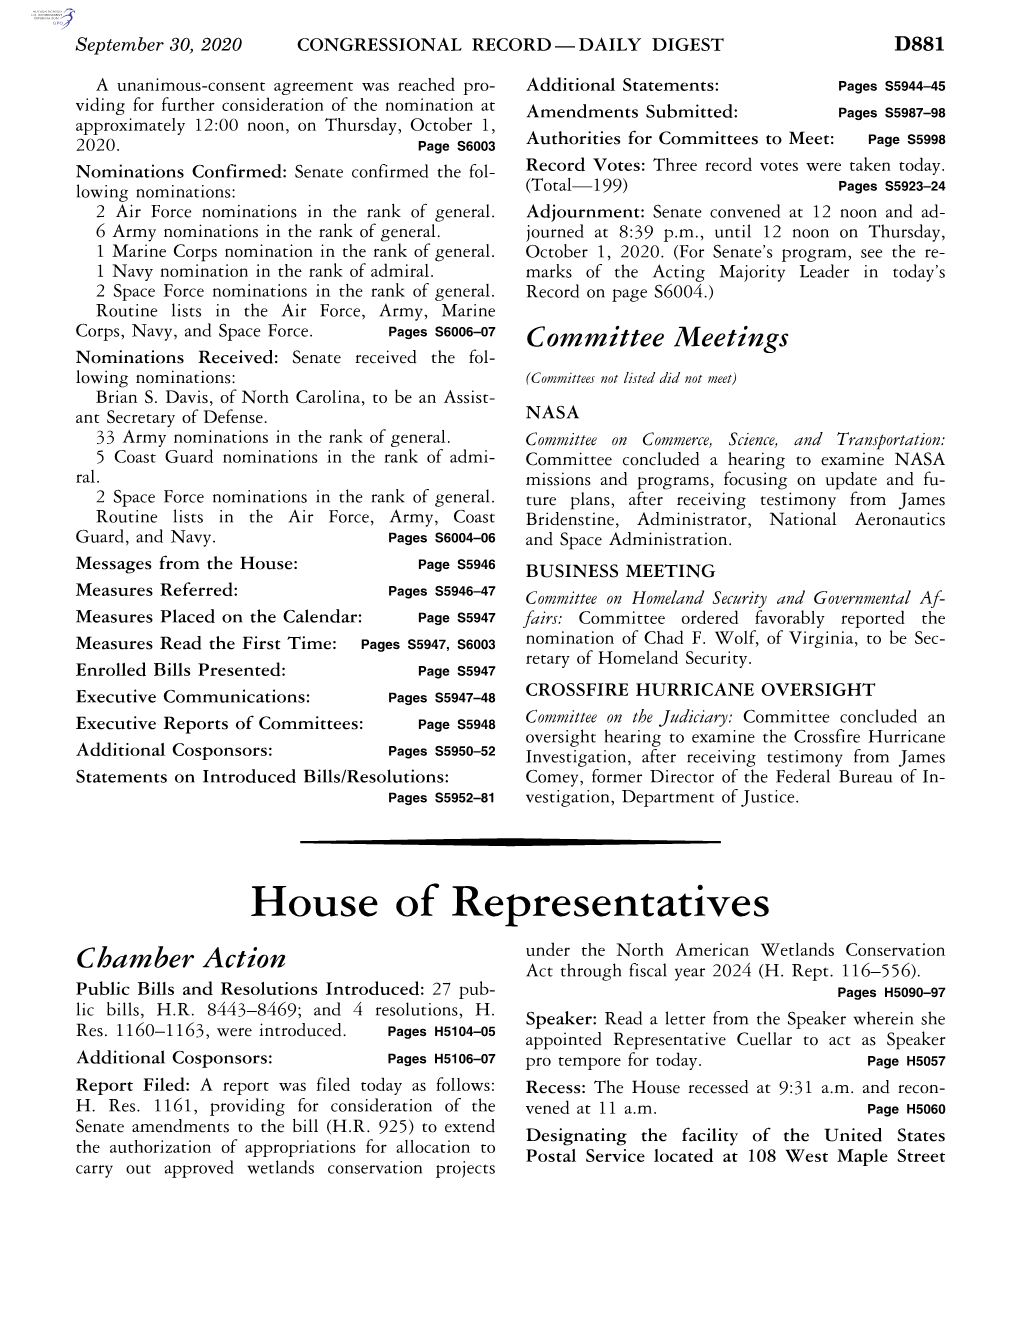 House of Representatives Under the North American Wetlands Conservation Chamber Action Act Through Fiscal Year 2024 (H